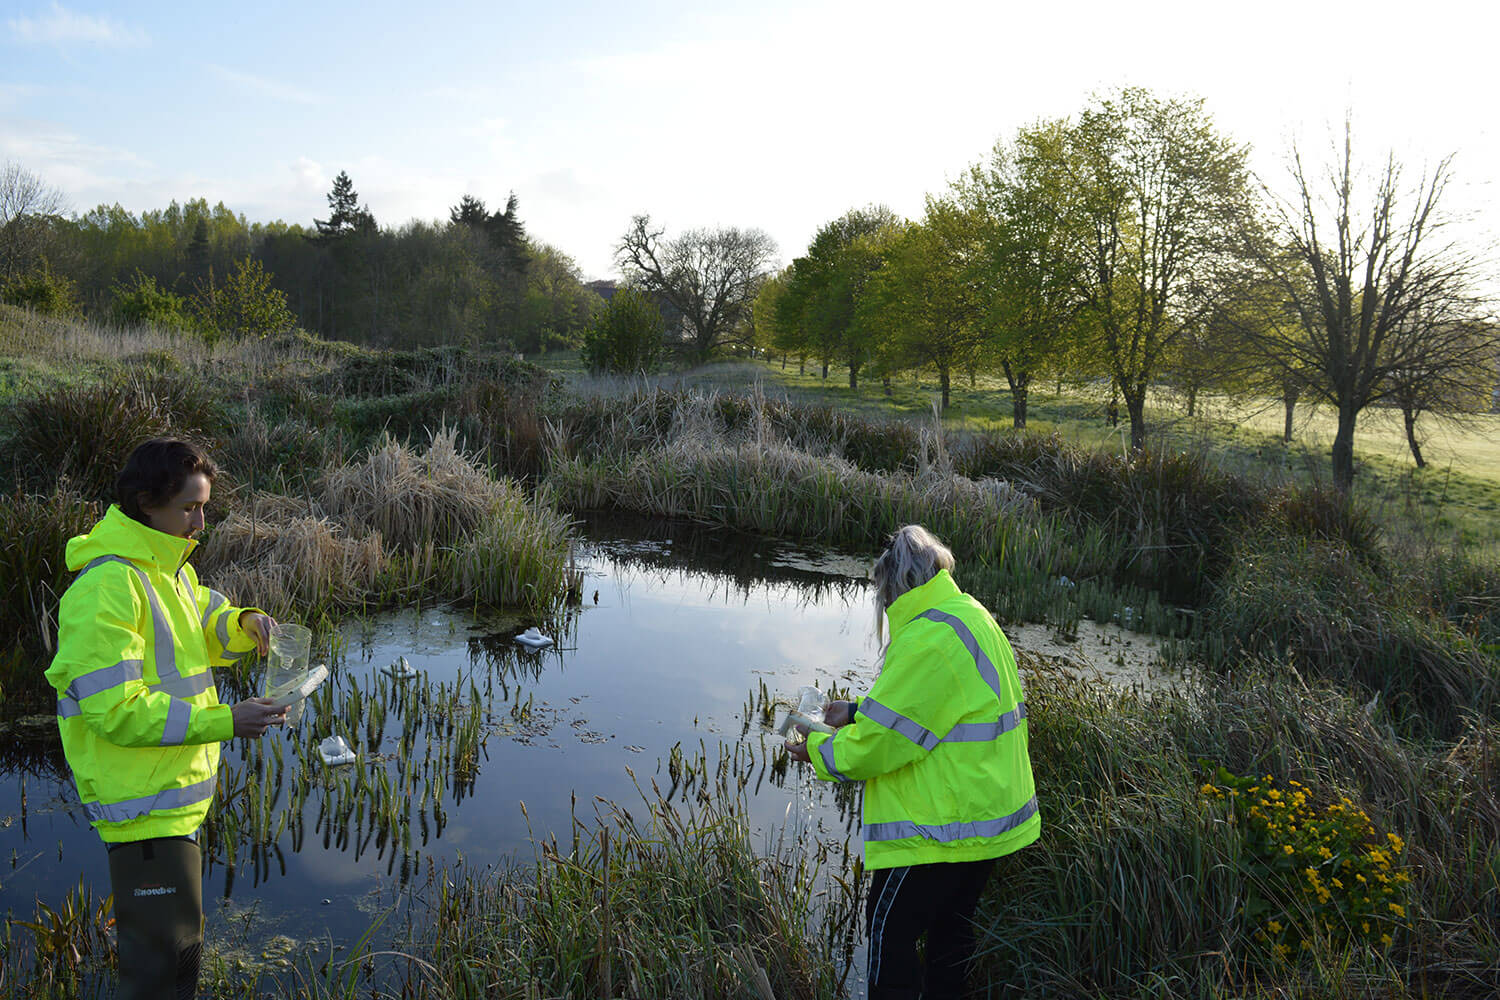 Two people carrying out the newt survey over a body of water in the early morning